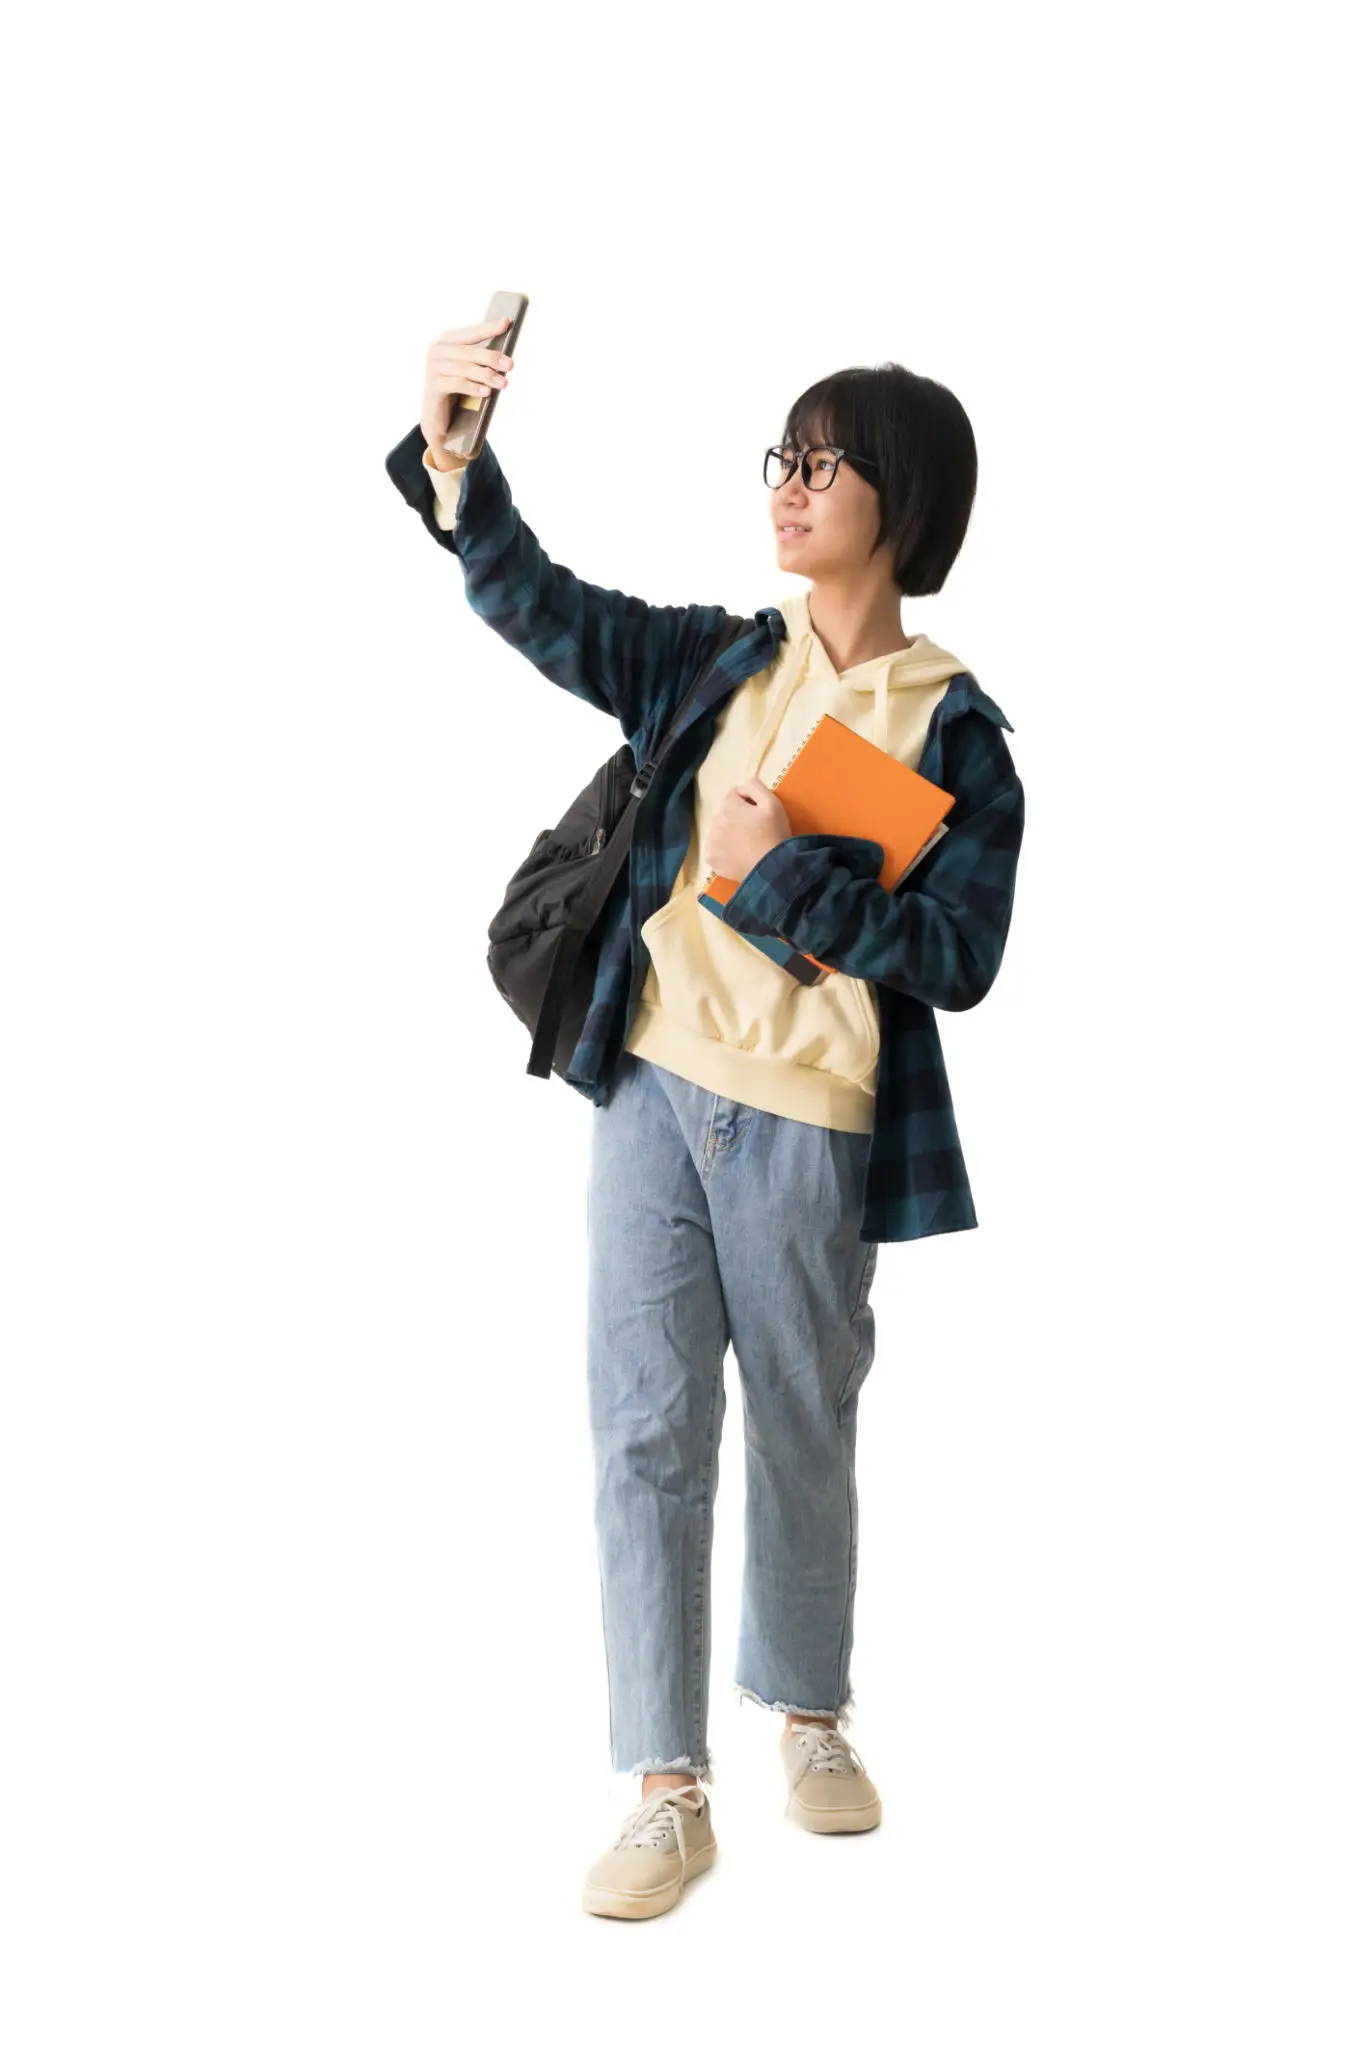 Happy Asian teen girl holding smart phone and book, isolate on white background.